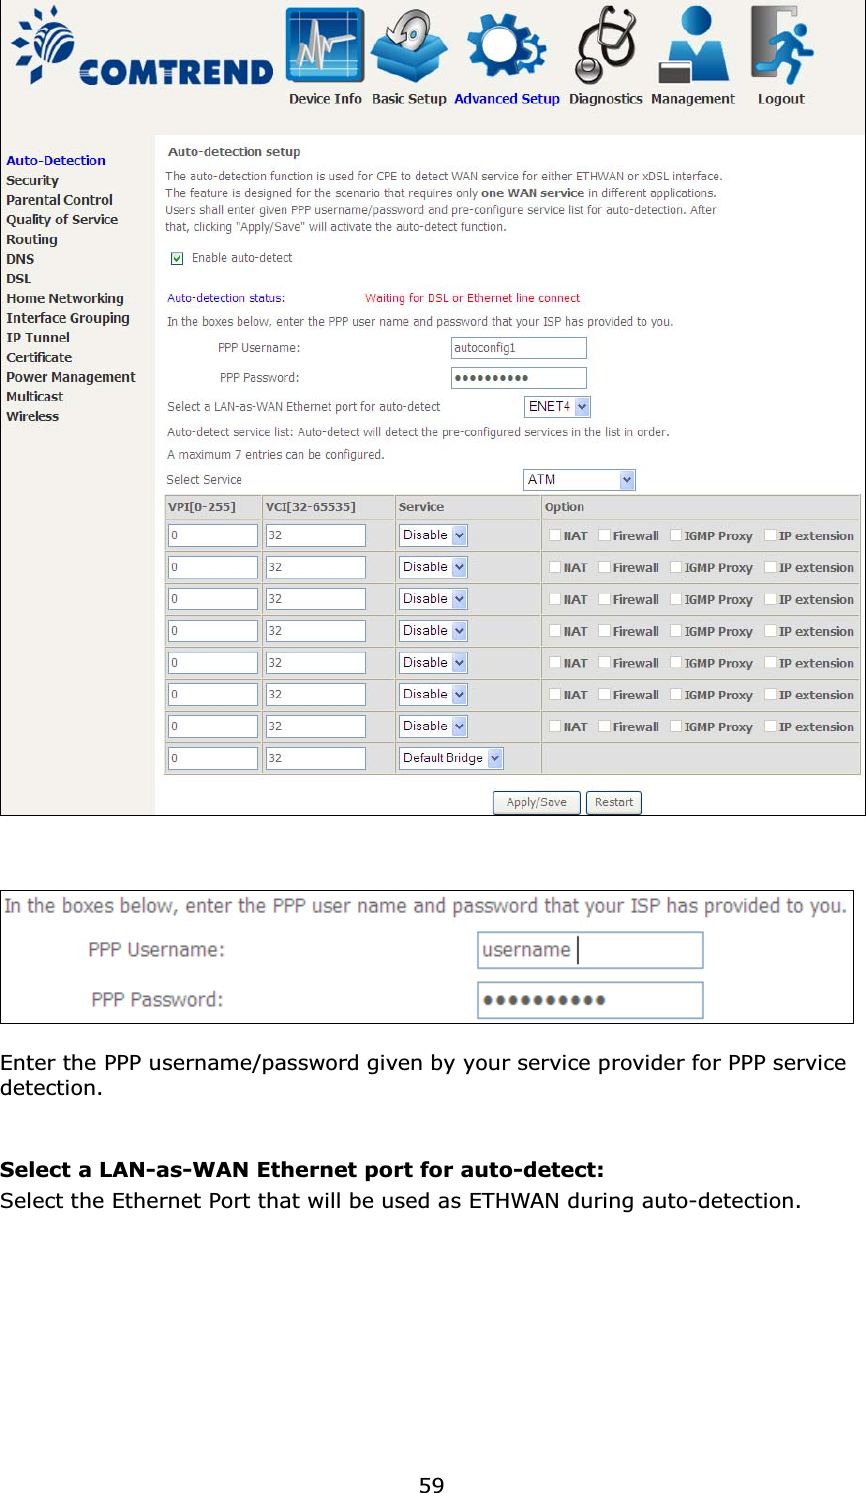 59Enter the PPP username/password given by your service provider for PPP service detection.Select a LAN-as-WAN Ethernet port for auto-detect:Select the Ethernet Port that will be used as ETHWAN during auto-detection.